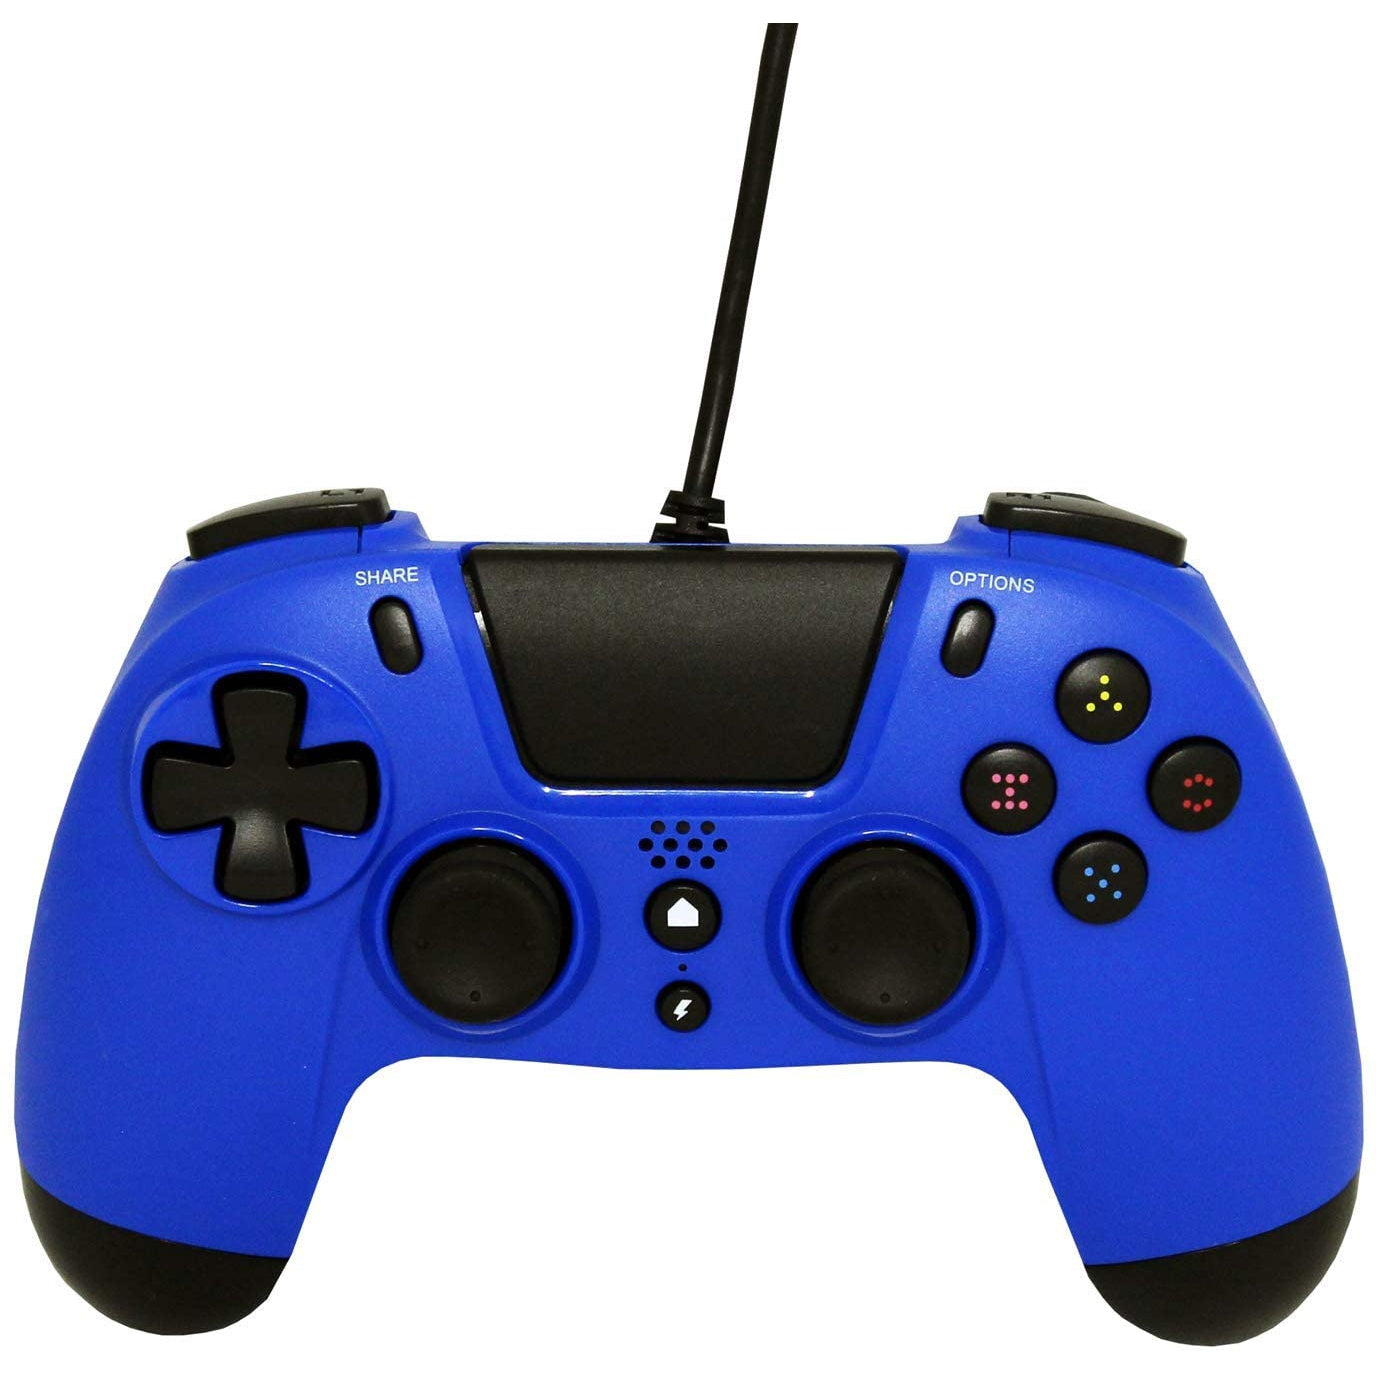 Gioteck VX-4 Wired Controller for PlayStation 4 - Blue - Excellent